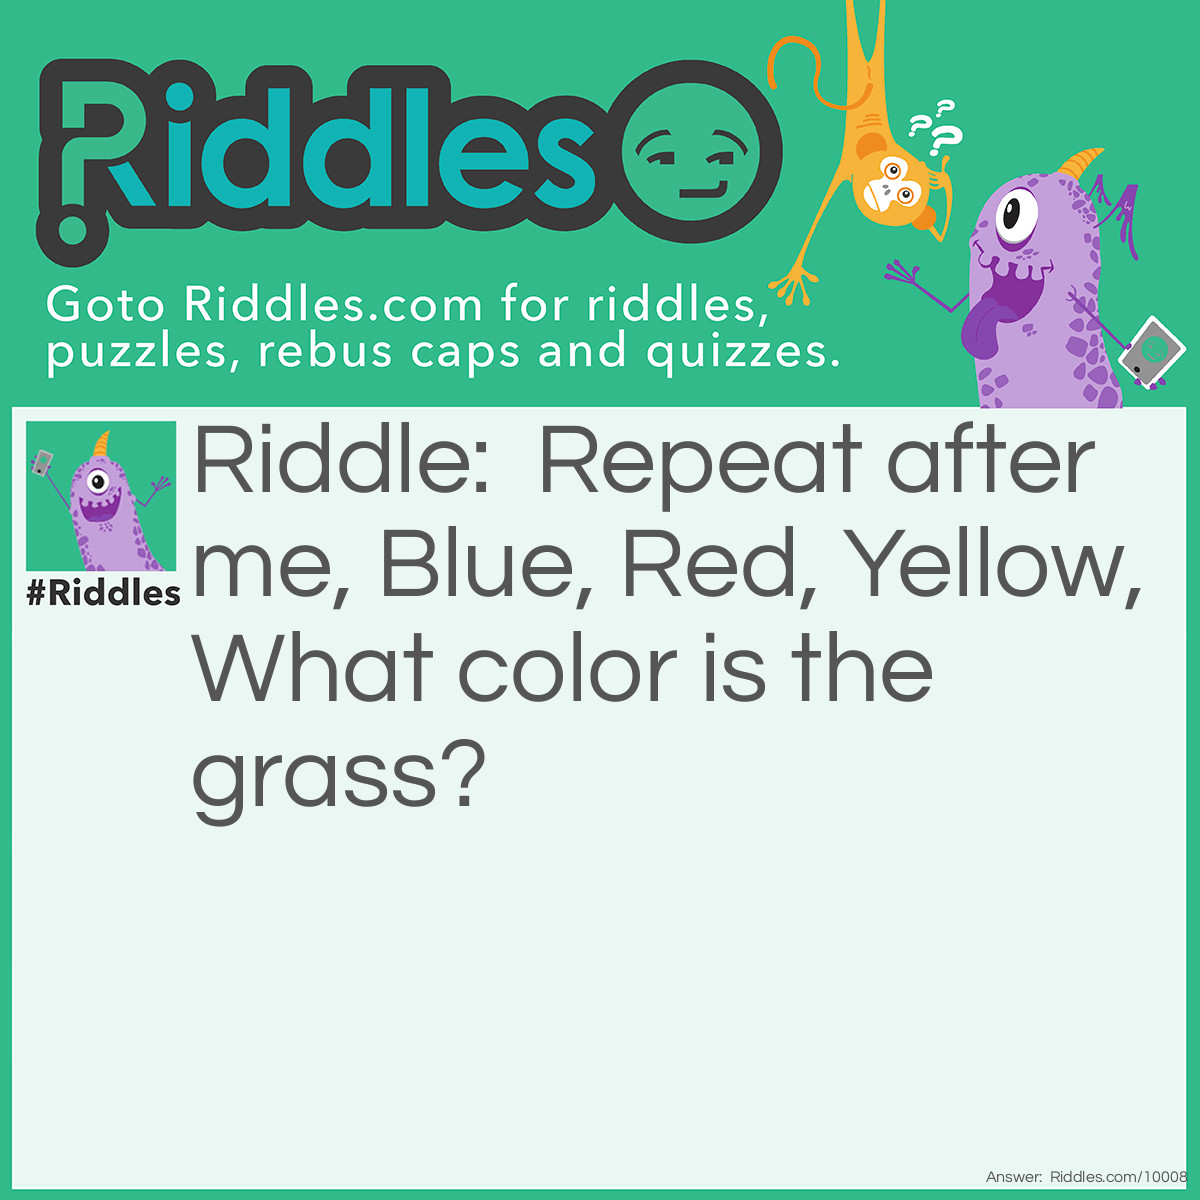 Riddle: Repeat after me, Blue, Red, Yellow, What color is the grass? Answer: They should say "What color is the grass" not green